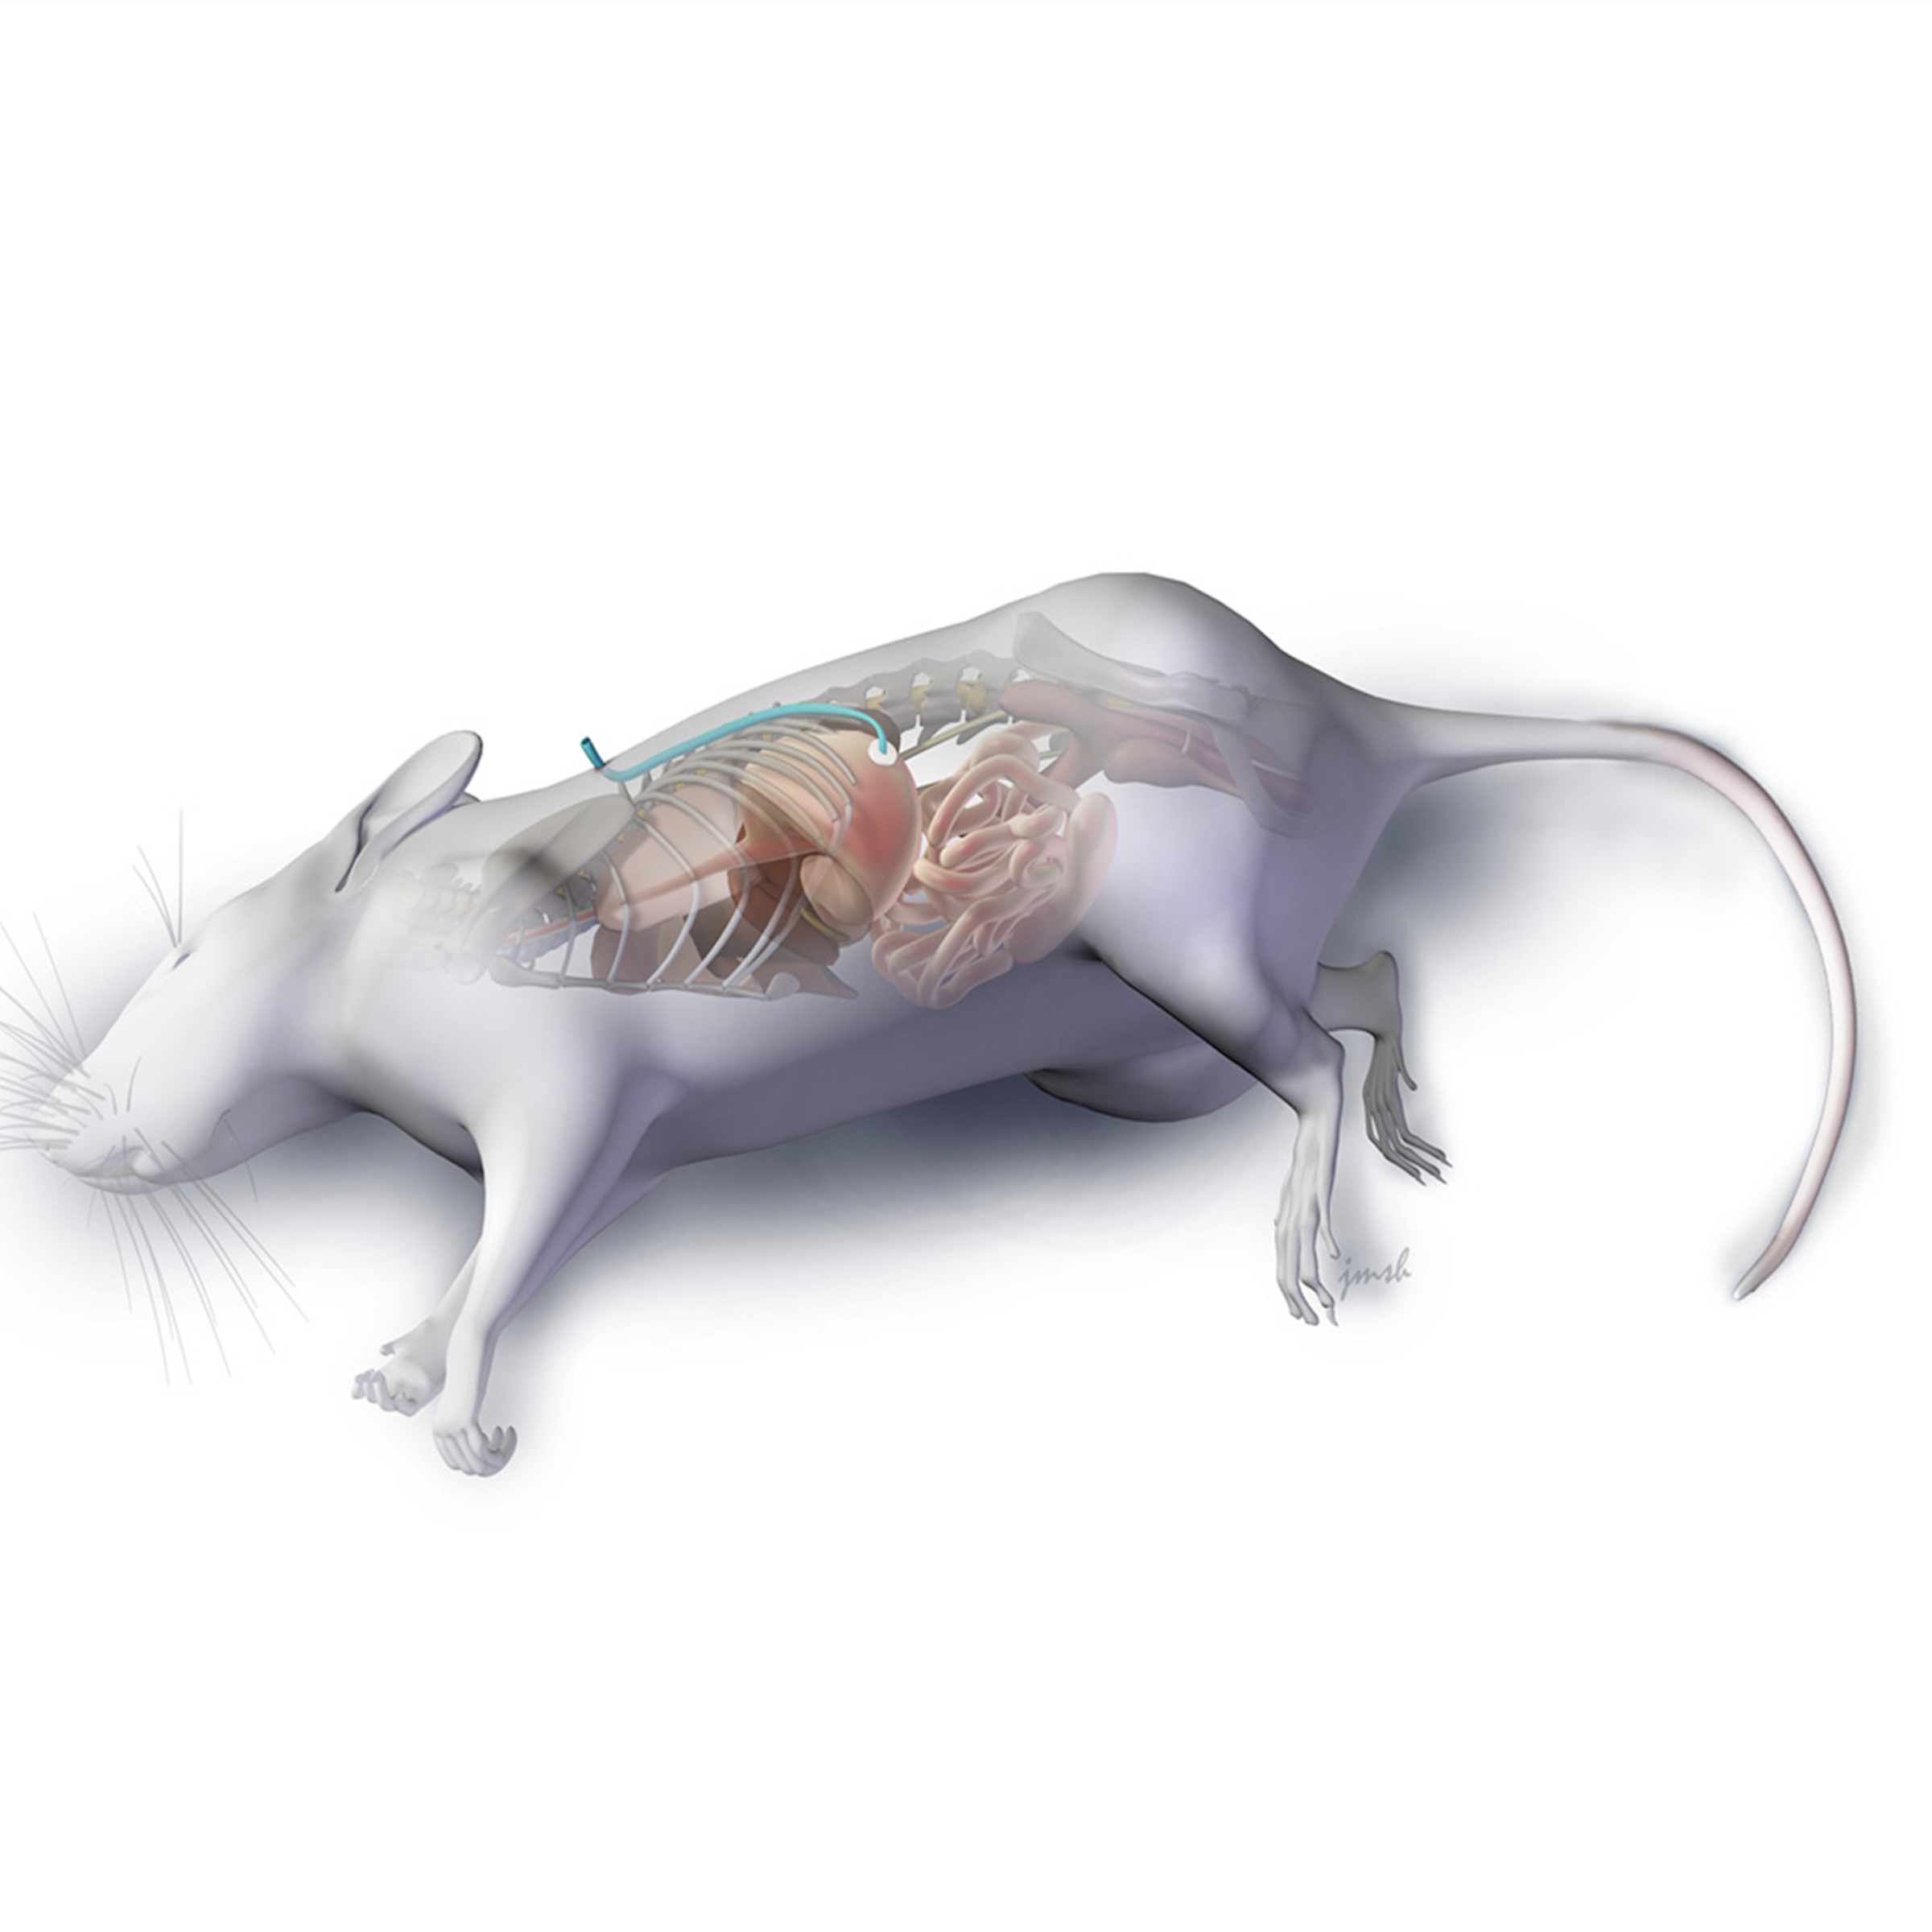 Illustration of a mouse, with the side view of the abdomen mapping out organs.